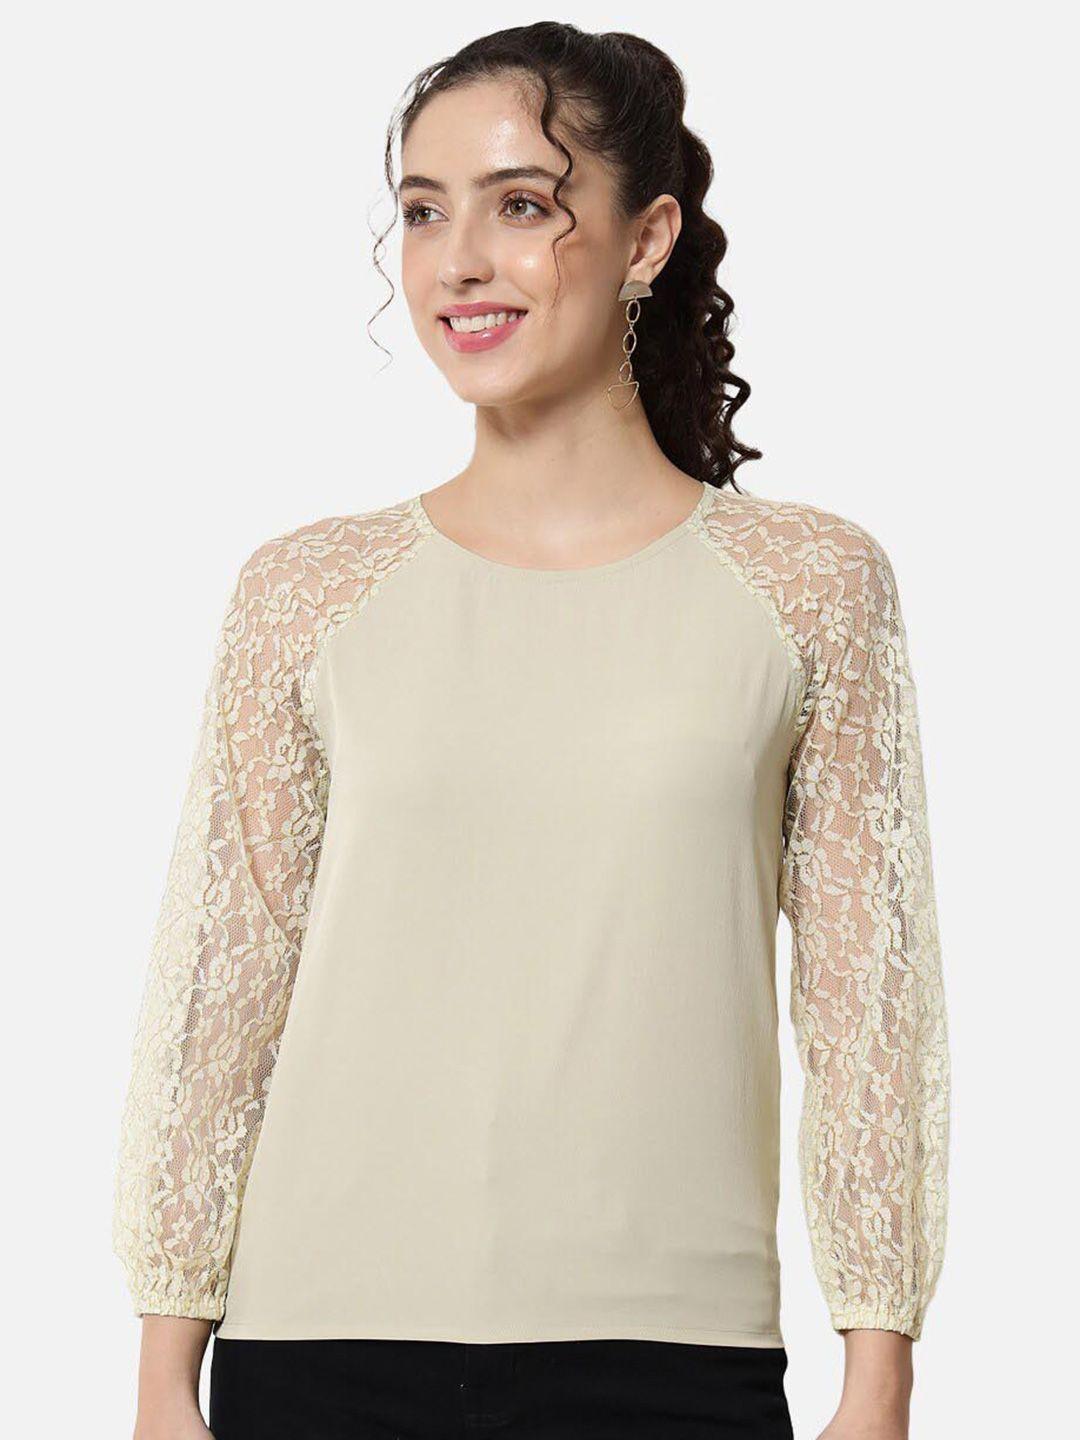 baesd-round-neck-raglan-sleeves-lace-up-top